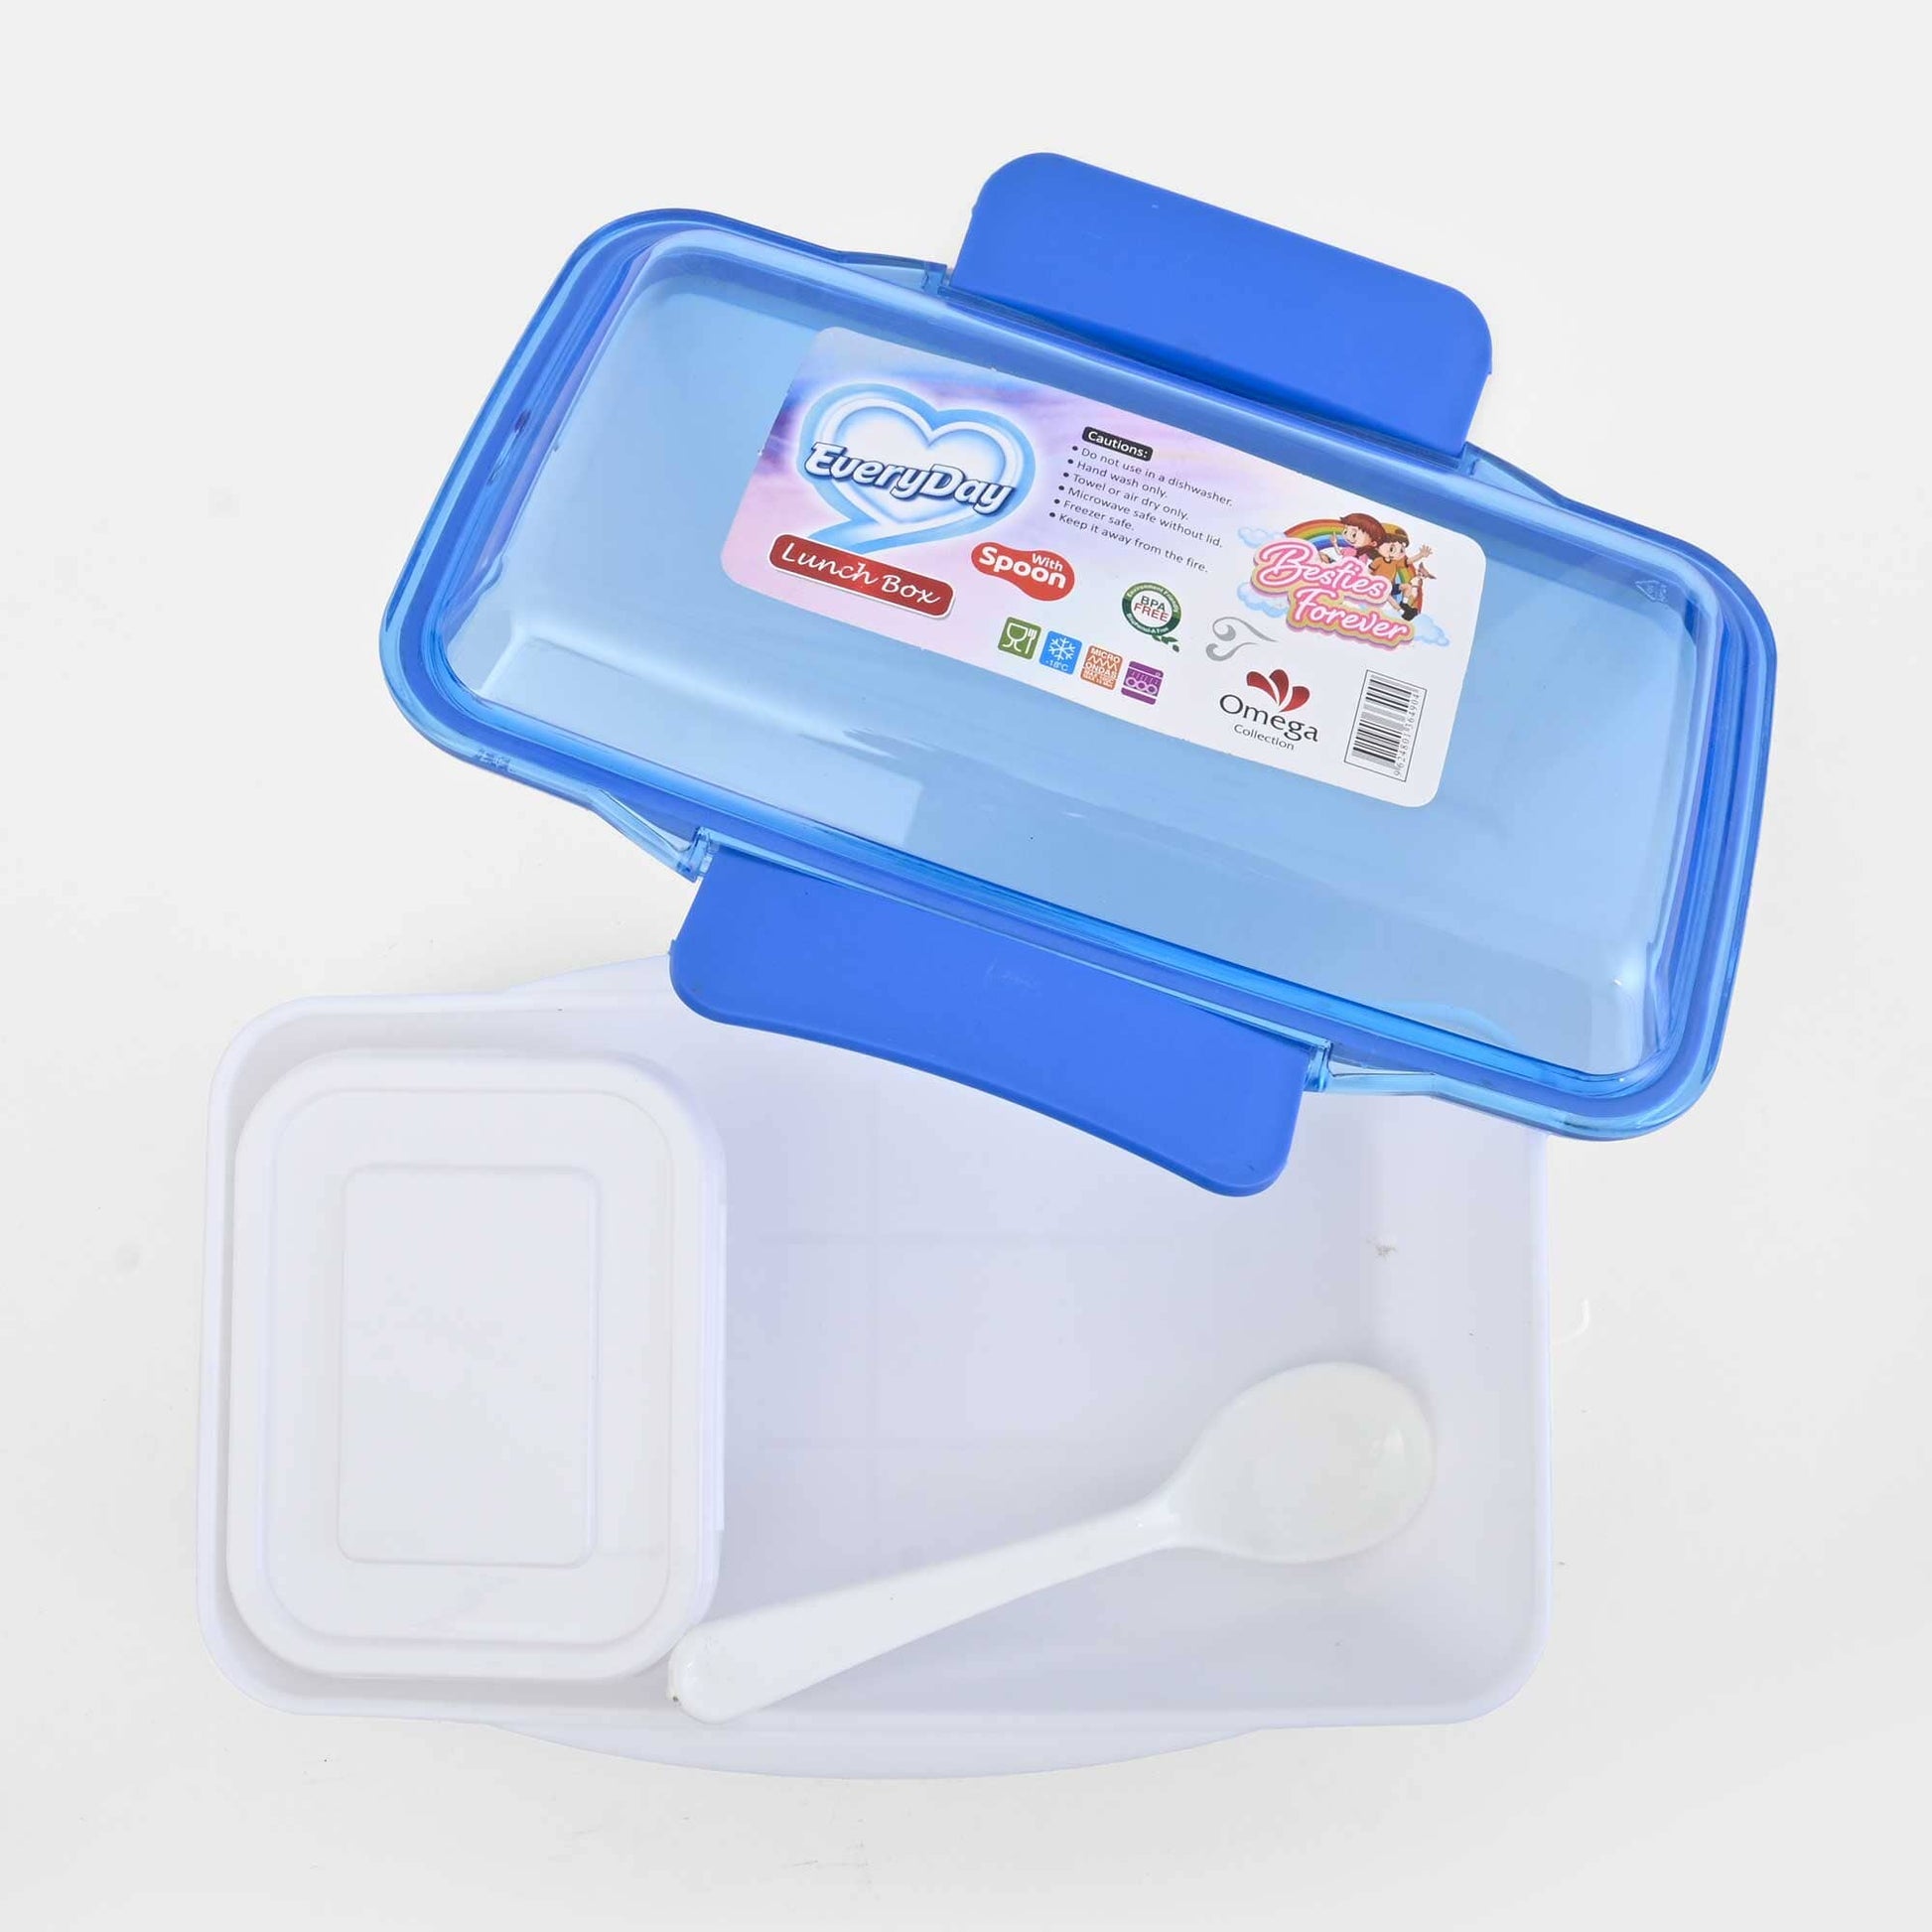 Everyday Kid's Besties Forever Lunch Box With Removable Sticker Crockery RAM White & Blue 